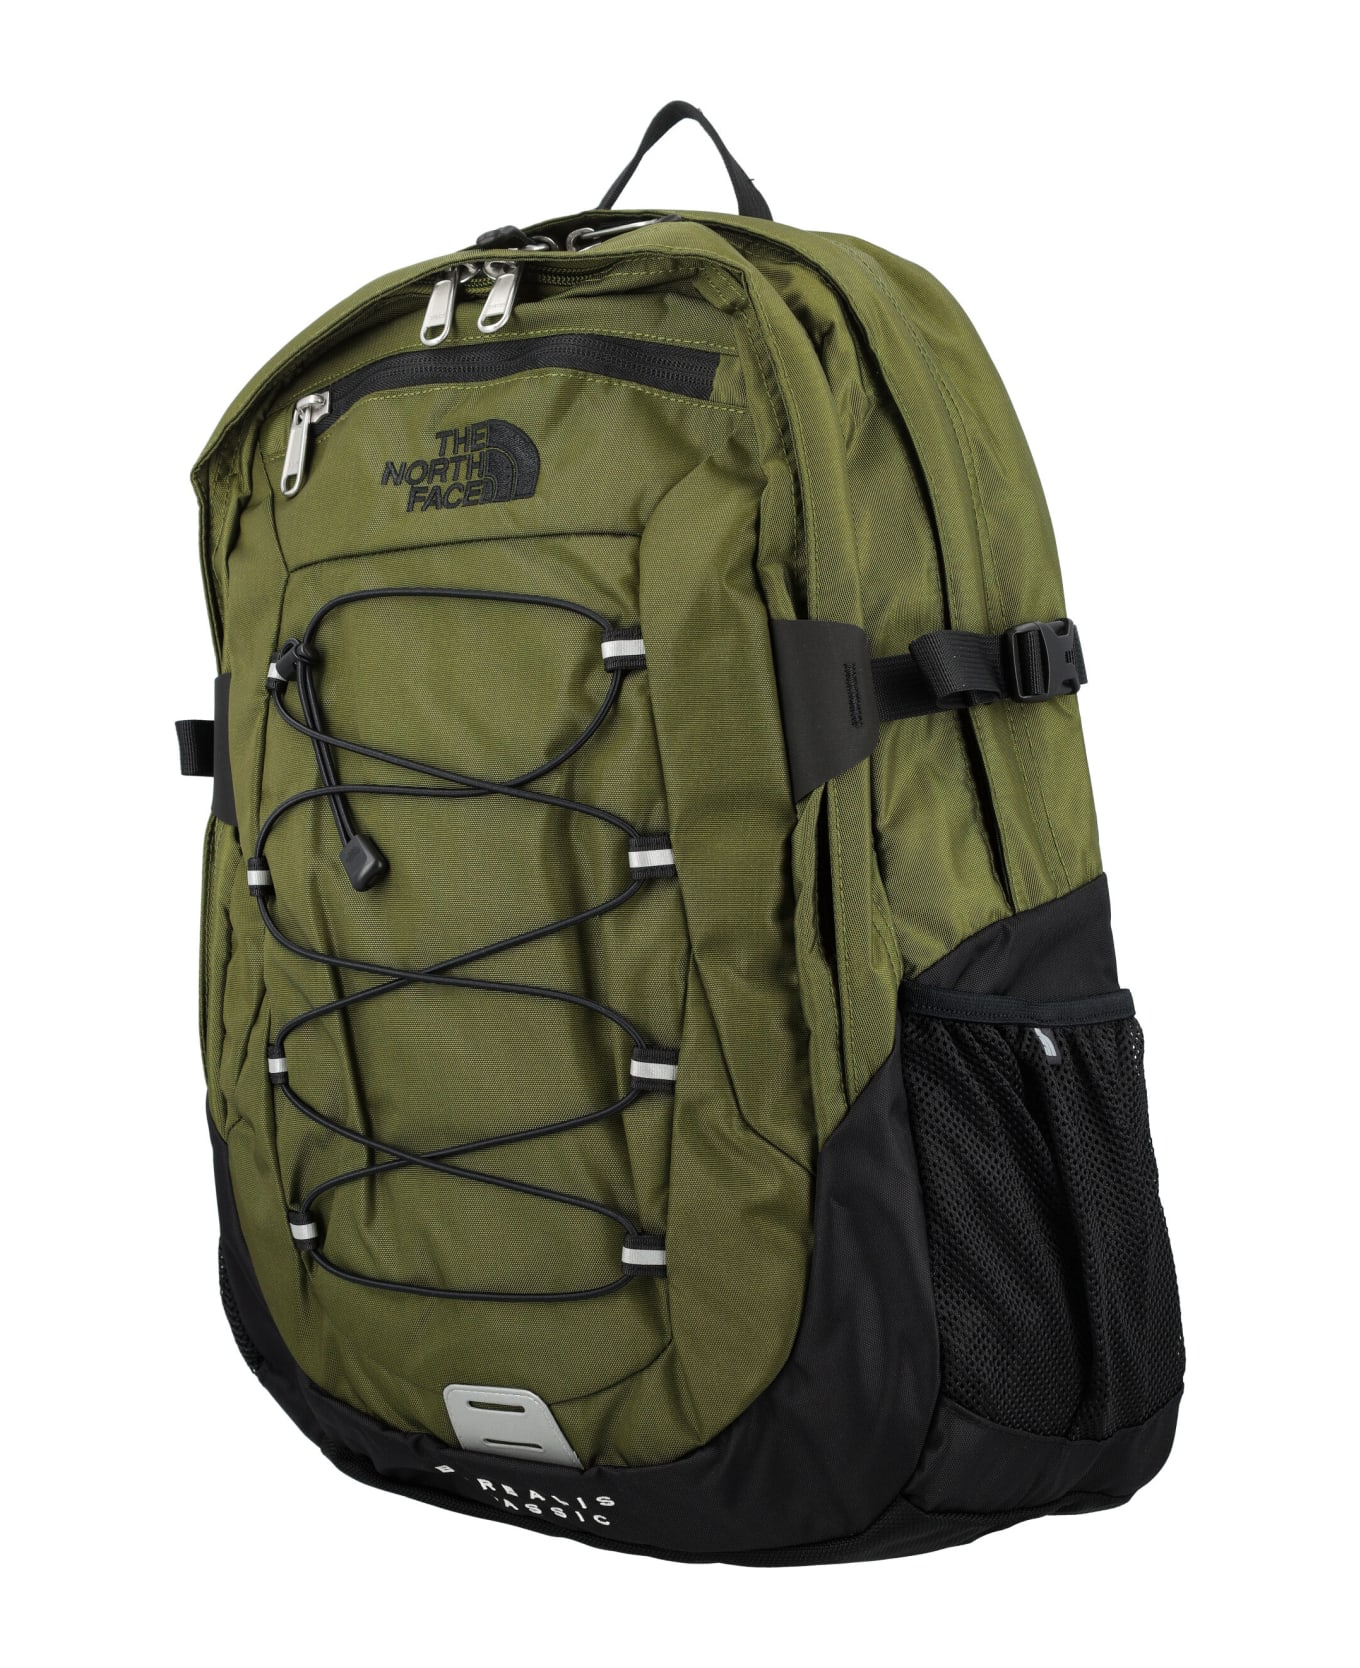 The North Face Borealis Classic Backpack - OLIVE バックパック